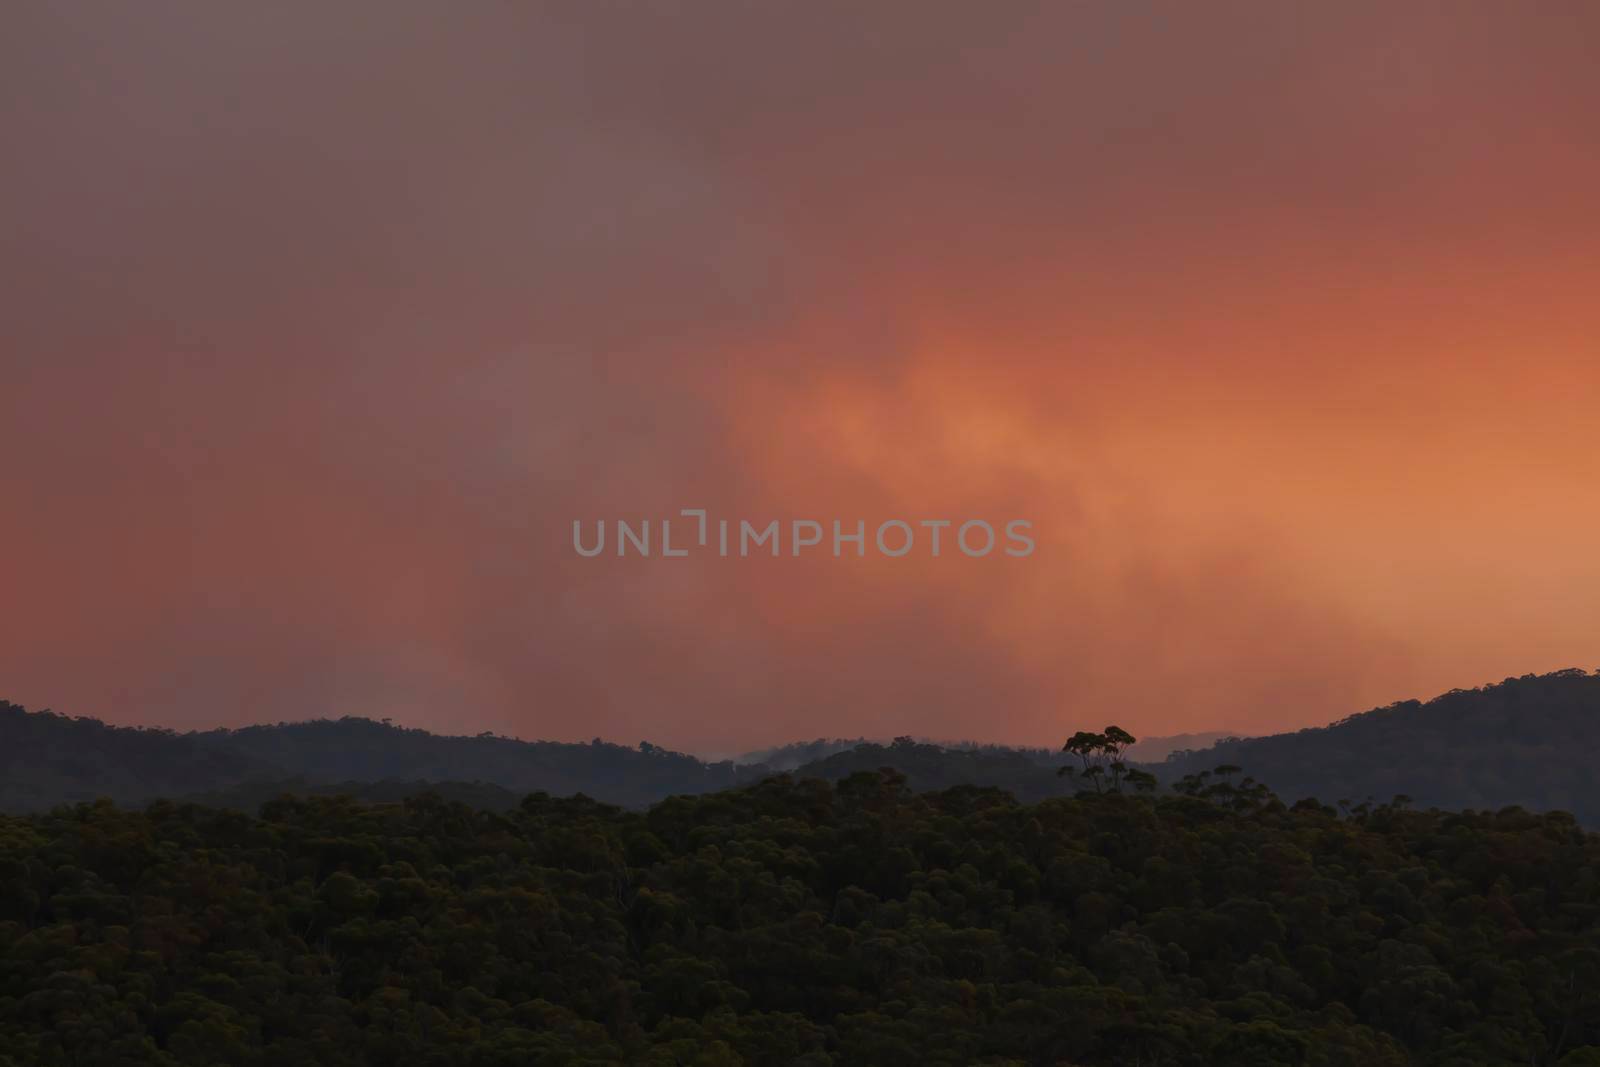 Photograph of bushfire smoke in The Blue Mountains in Australia by WittkePhotos